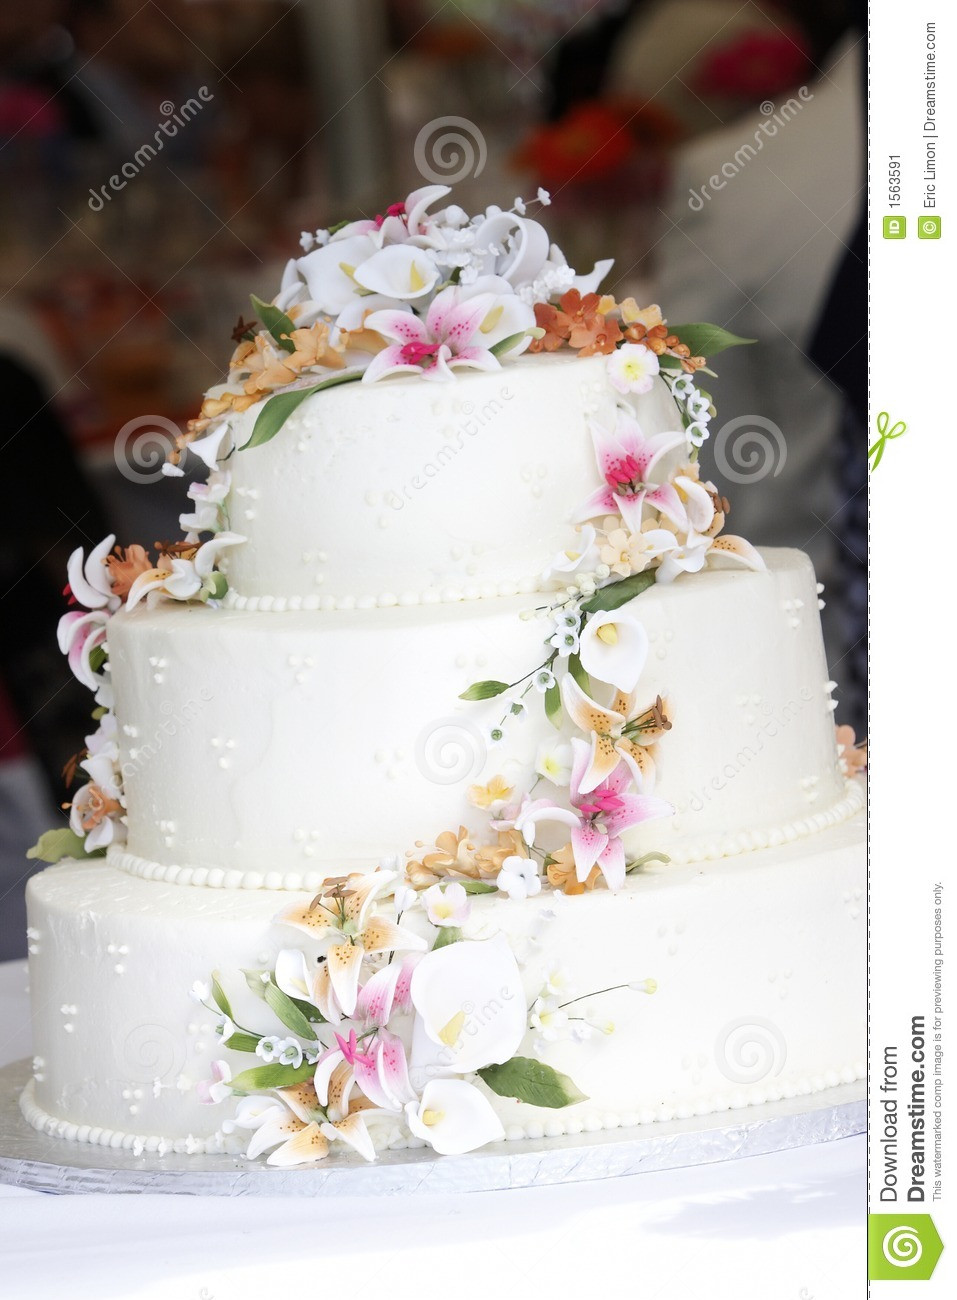 Sugar Flowers For Wedding Cakes
 Wedding Cake With Candy Sugar Flowers Stock Image Image